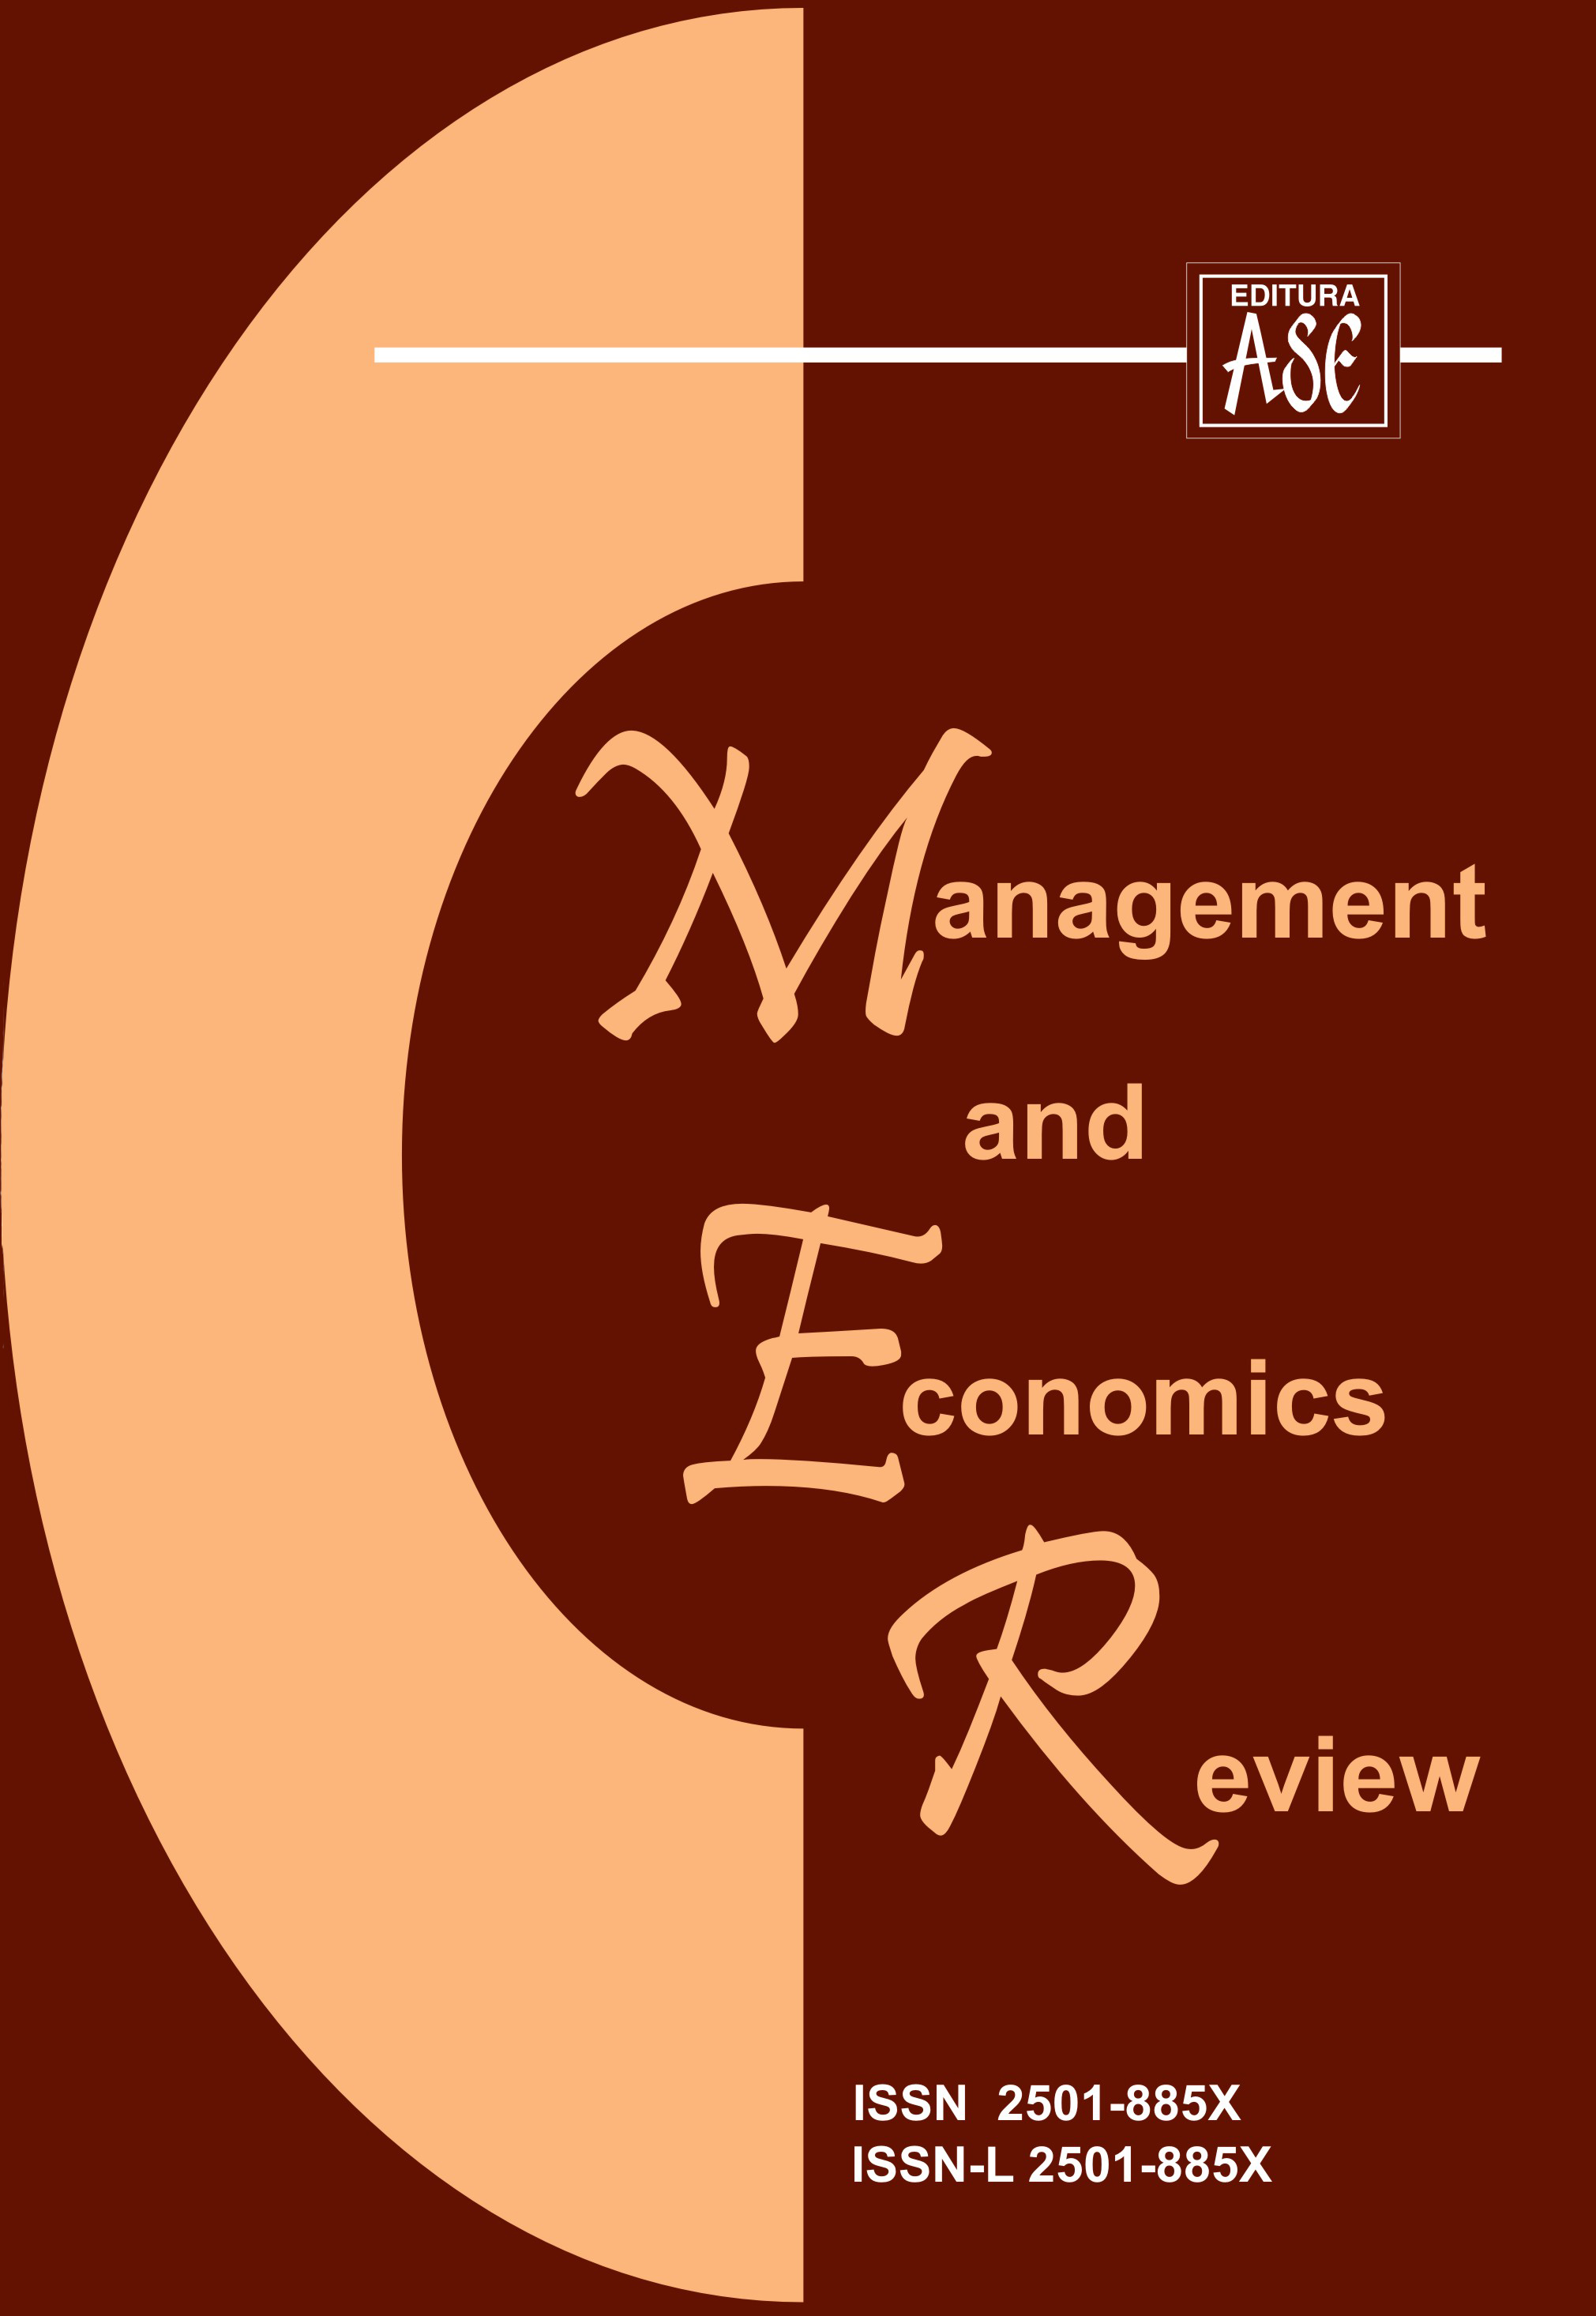 Female Labor Force Participation Rate in Indonesia: An Empirical Evidence from Panel Data Approach Cover Image